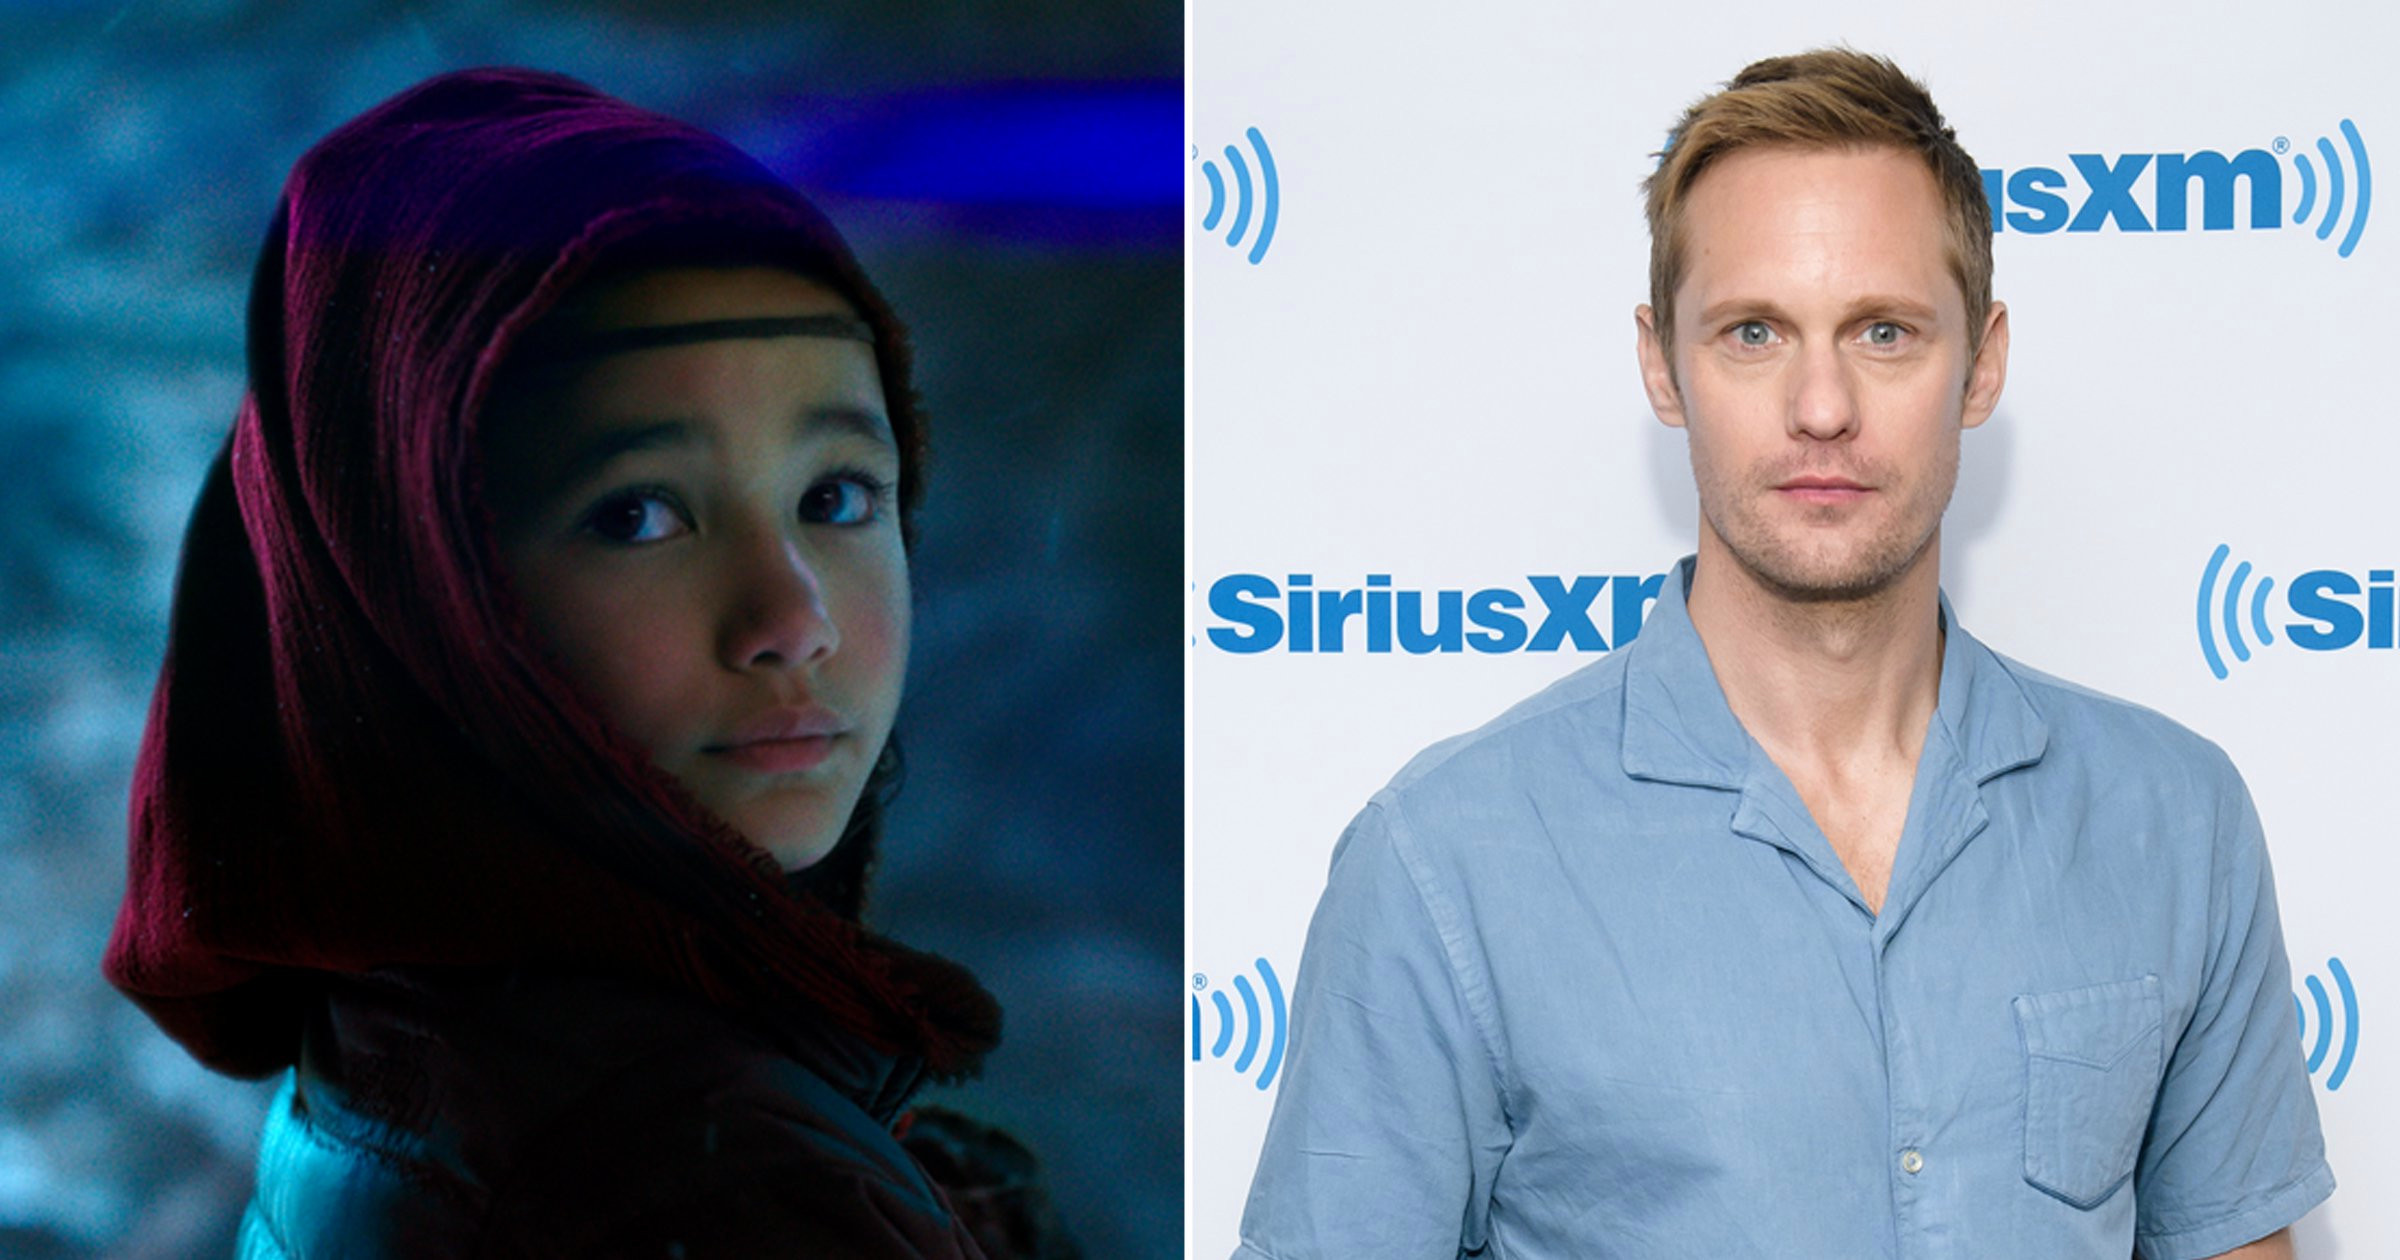 Alexander Skarsgard learned sign language to communicate with deaf Godzilla Vs Kong co-star